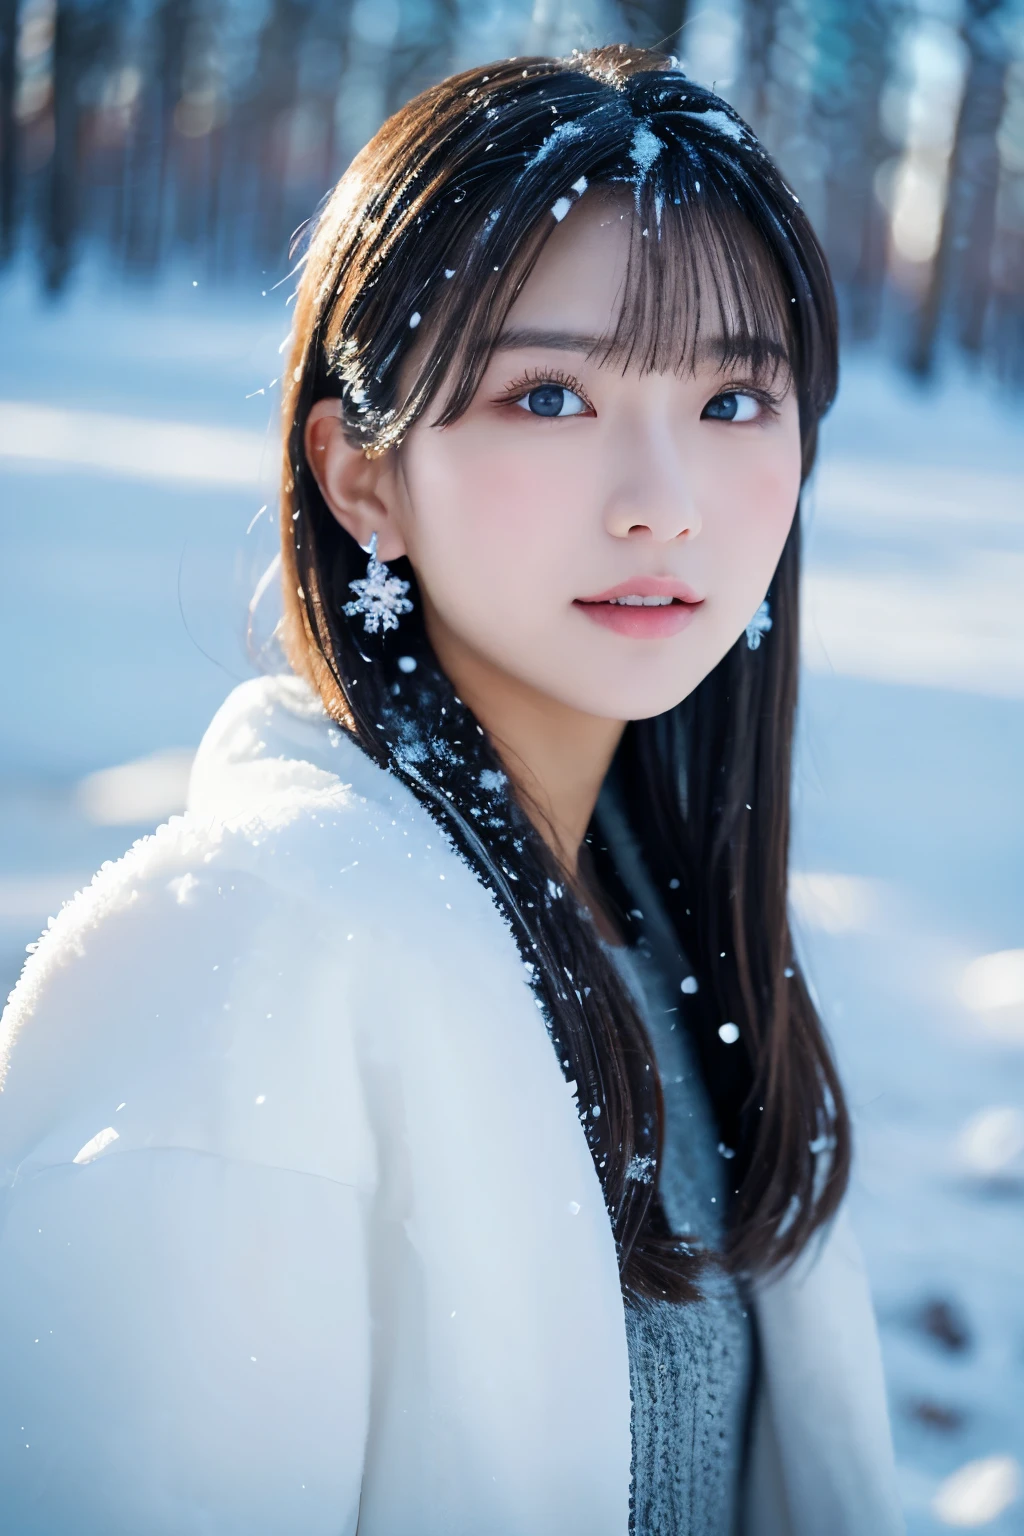 1girl in, (white winter costume:1.2), Japanese beautiful actress,
(Raw photo, Best Quality), (Realistic, Photorealsitic:1.4), (masutepiece), photogenic,
Snow Princess, Beautiful detailed eyes, Beautiful detailed lips, extremely detailed eye and face, long eyelashes,
Snowflake Earrings,
BREAK
(Frozen snow field in winter Lapland), 
Sparkling snowflakes, ethereal beauty, Swirling snowflakes, Snowy trees々, 
Powder snow, snow-capped mountain, Icy breath,
A silver world filled with dazzling light, (snowflakes are shining in the air:1.4), 
Blue and silver color scheme, dramatic  lighting, Fantastic atmosphere,  
BREAK 
Perfect Anatomy, Slender body, Small, Short hair, Parted bangs, Angel Smile,
Crystal-like skin, Clear eyes, catchlight